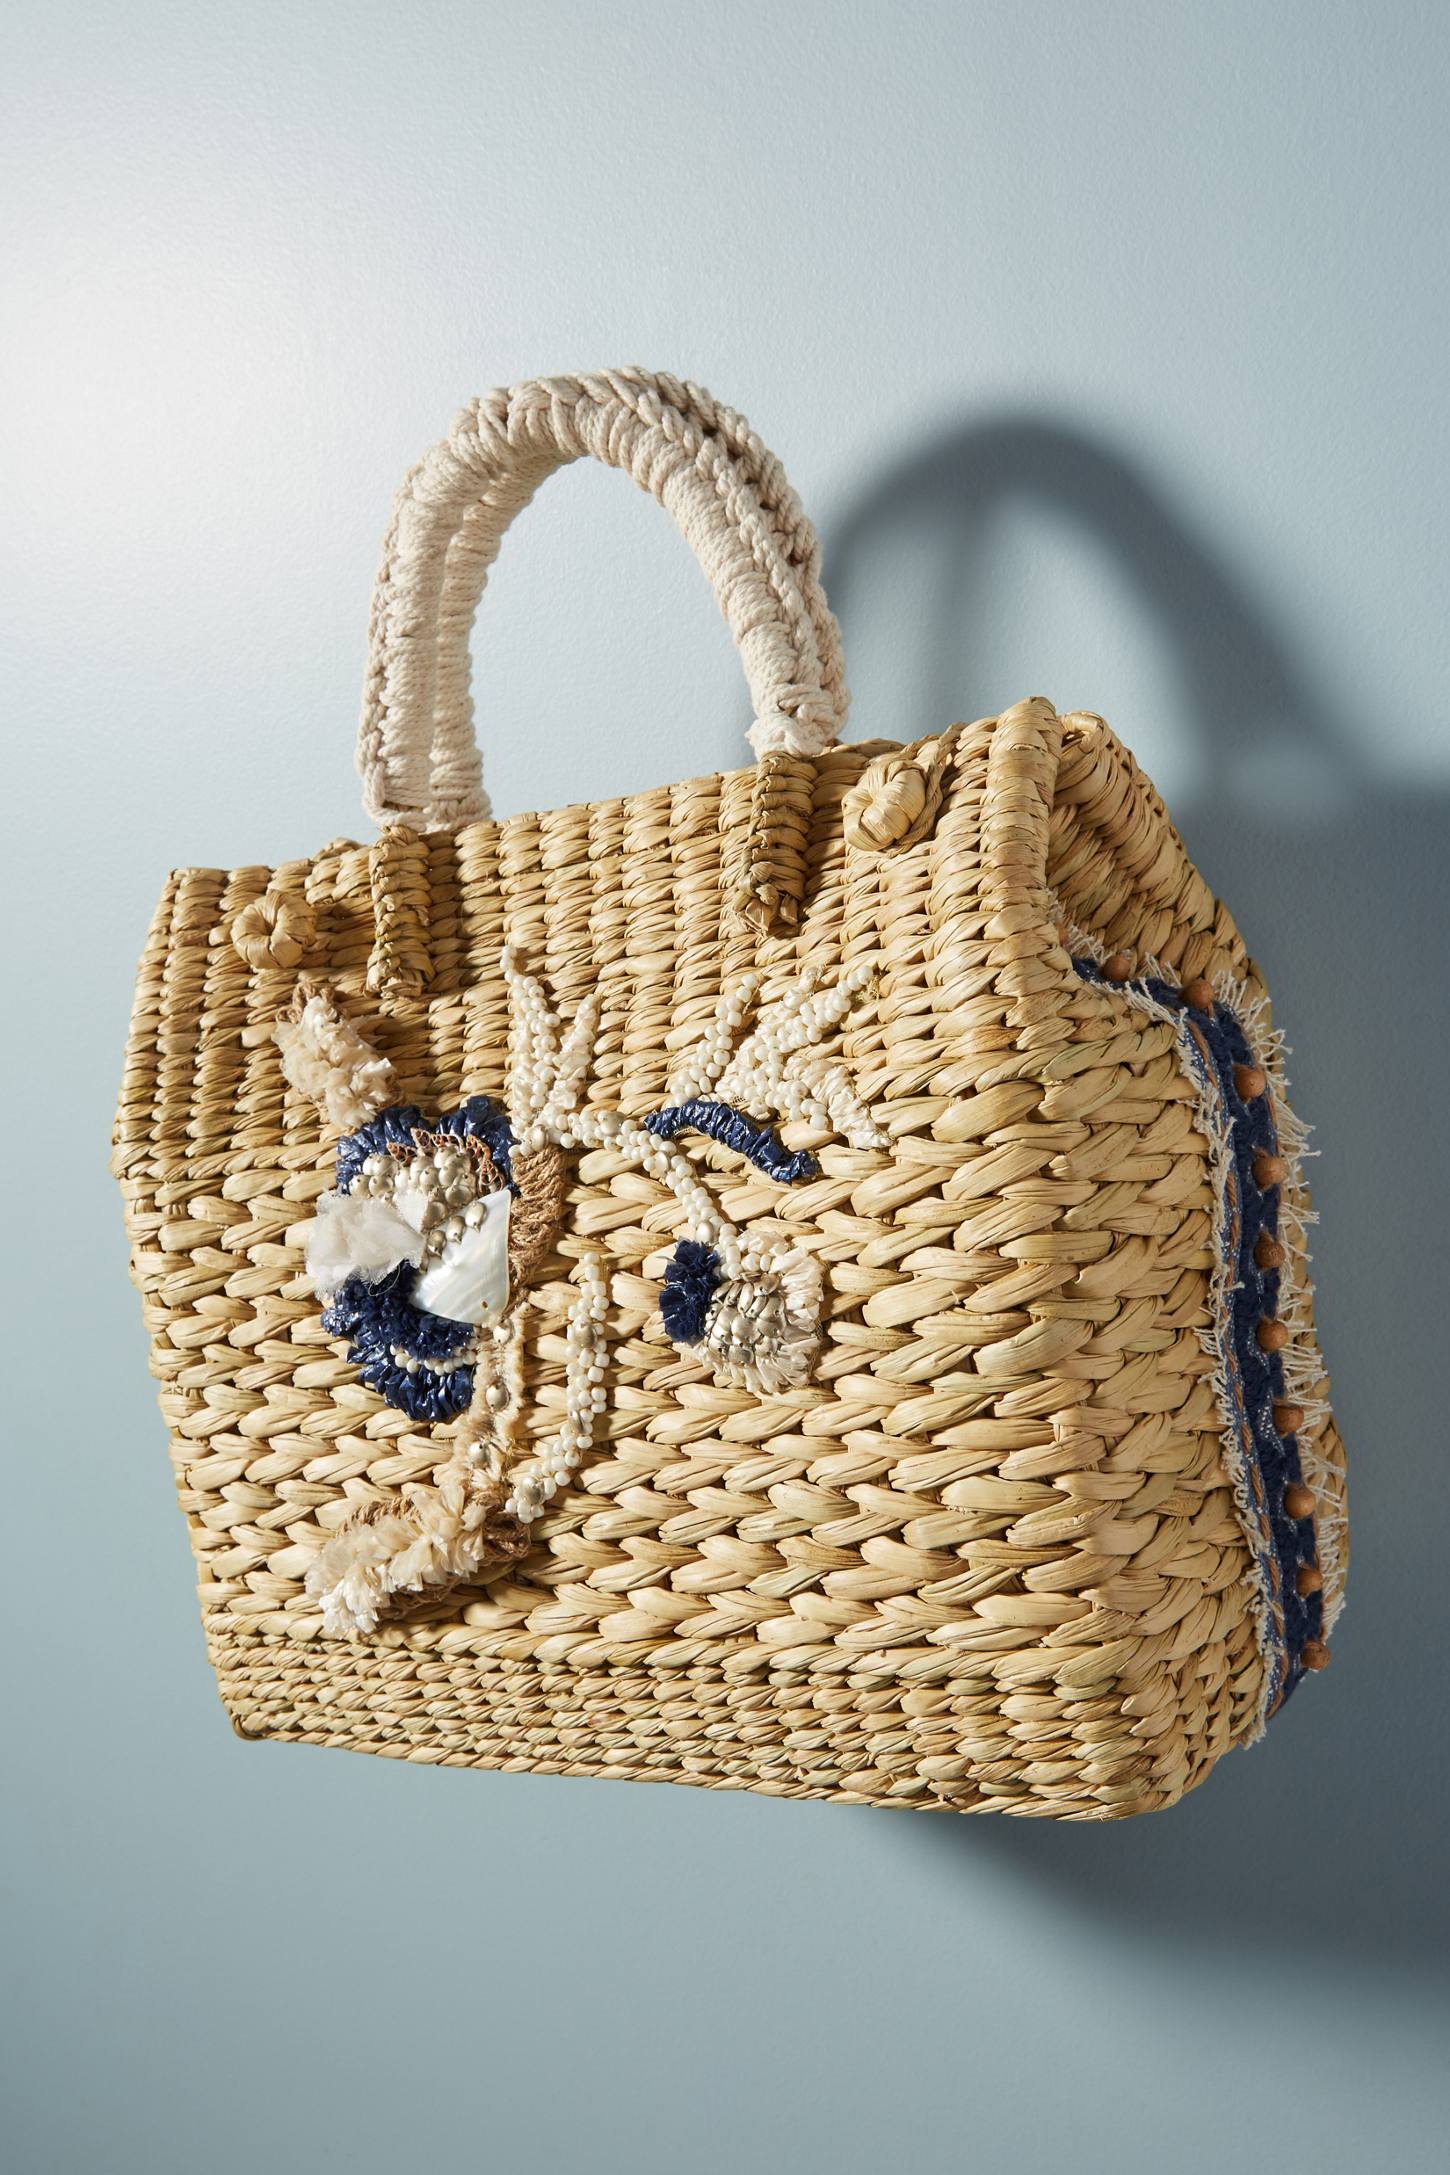 Floral Straw Tote Bag